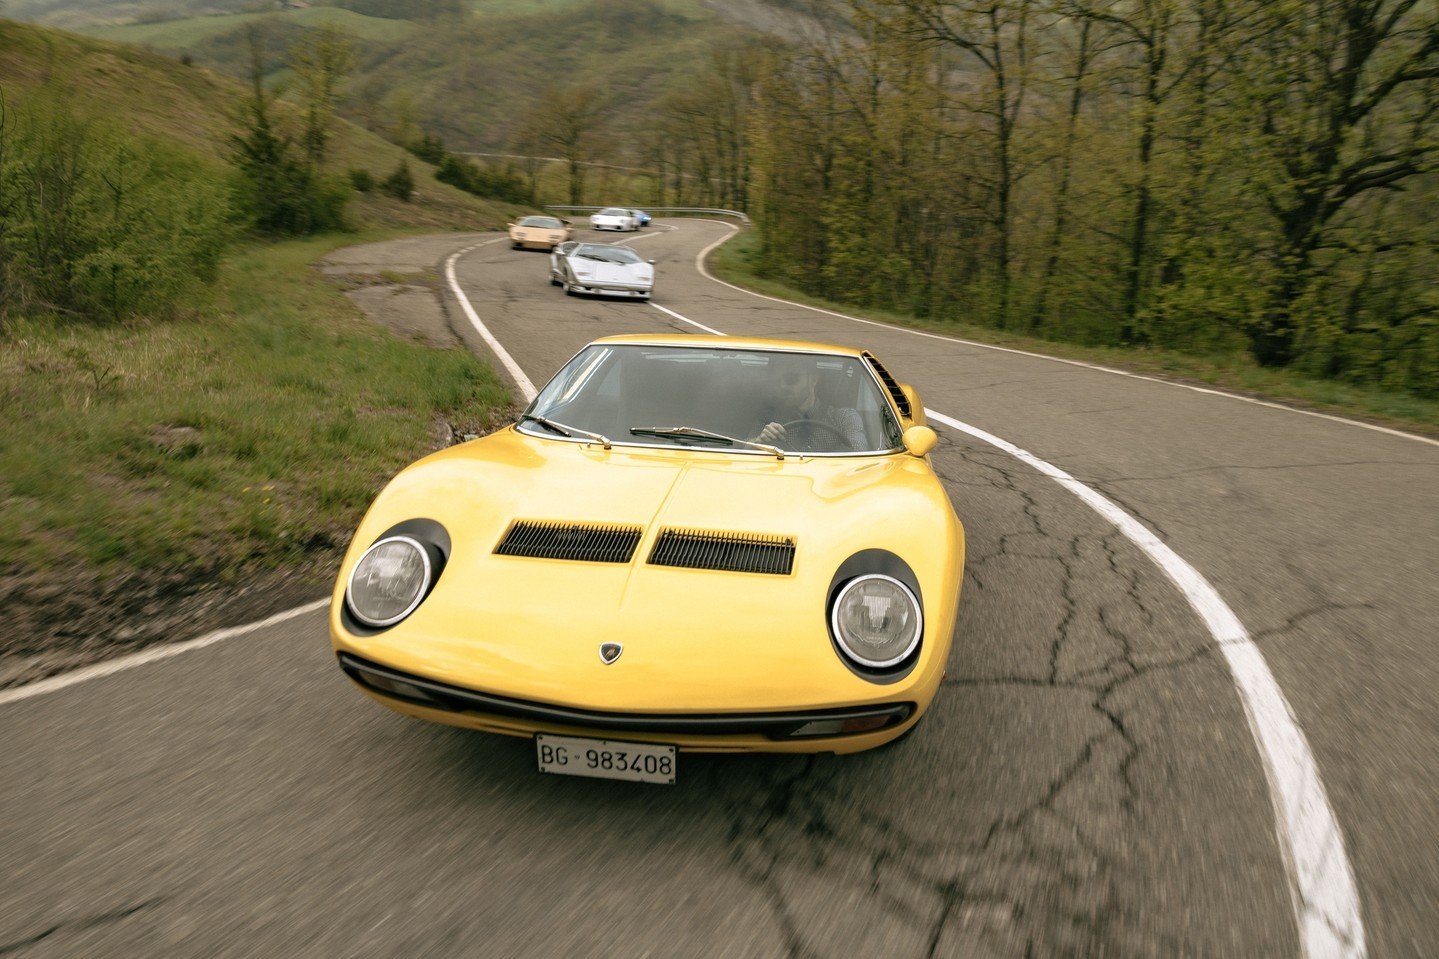 As the @F1 circus heads to Emilia Romagana 🇮🇹 for a #sundaydrive here's a reminder of one of the most extraordinary days in Detour's history, where we celebrated @lamborghini 's history by driving not one, but eight incredible cars around the regio